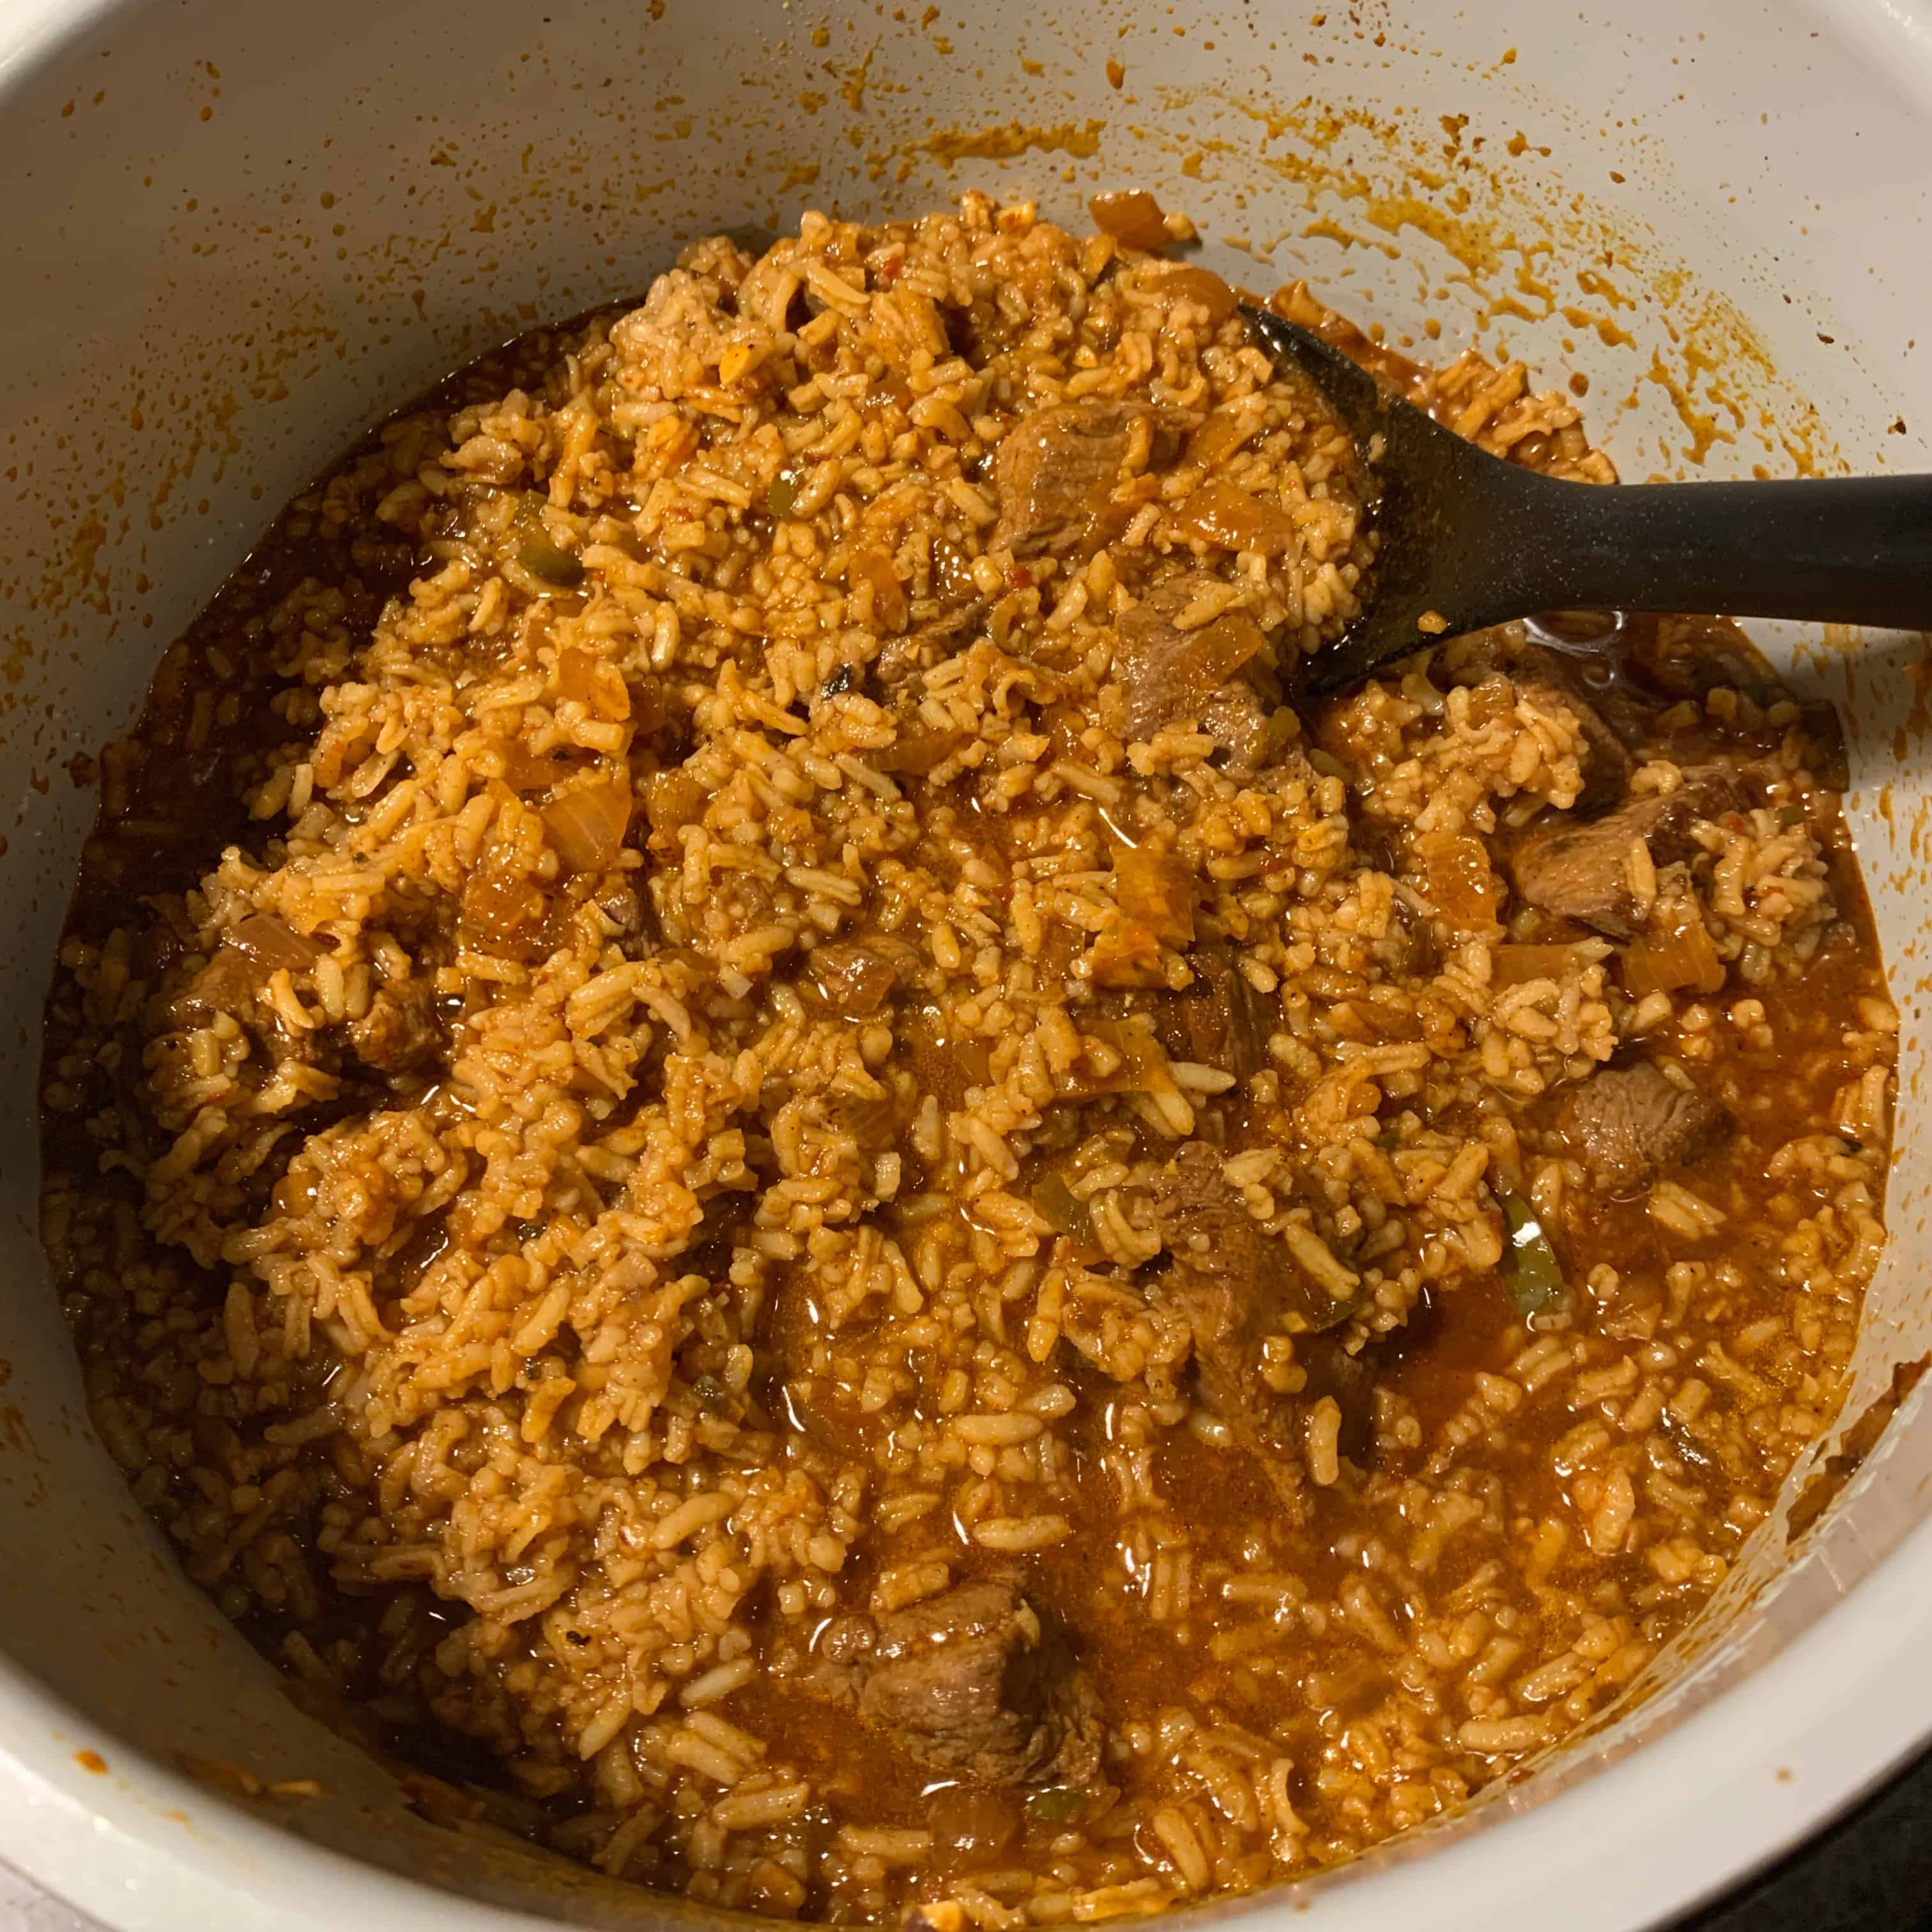 cooked Texas chili with rice